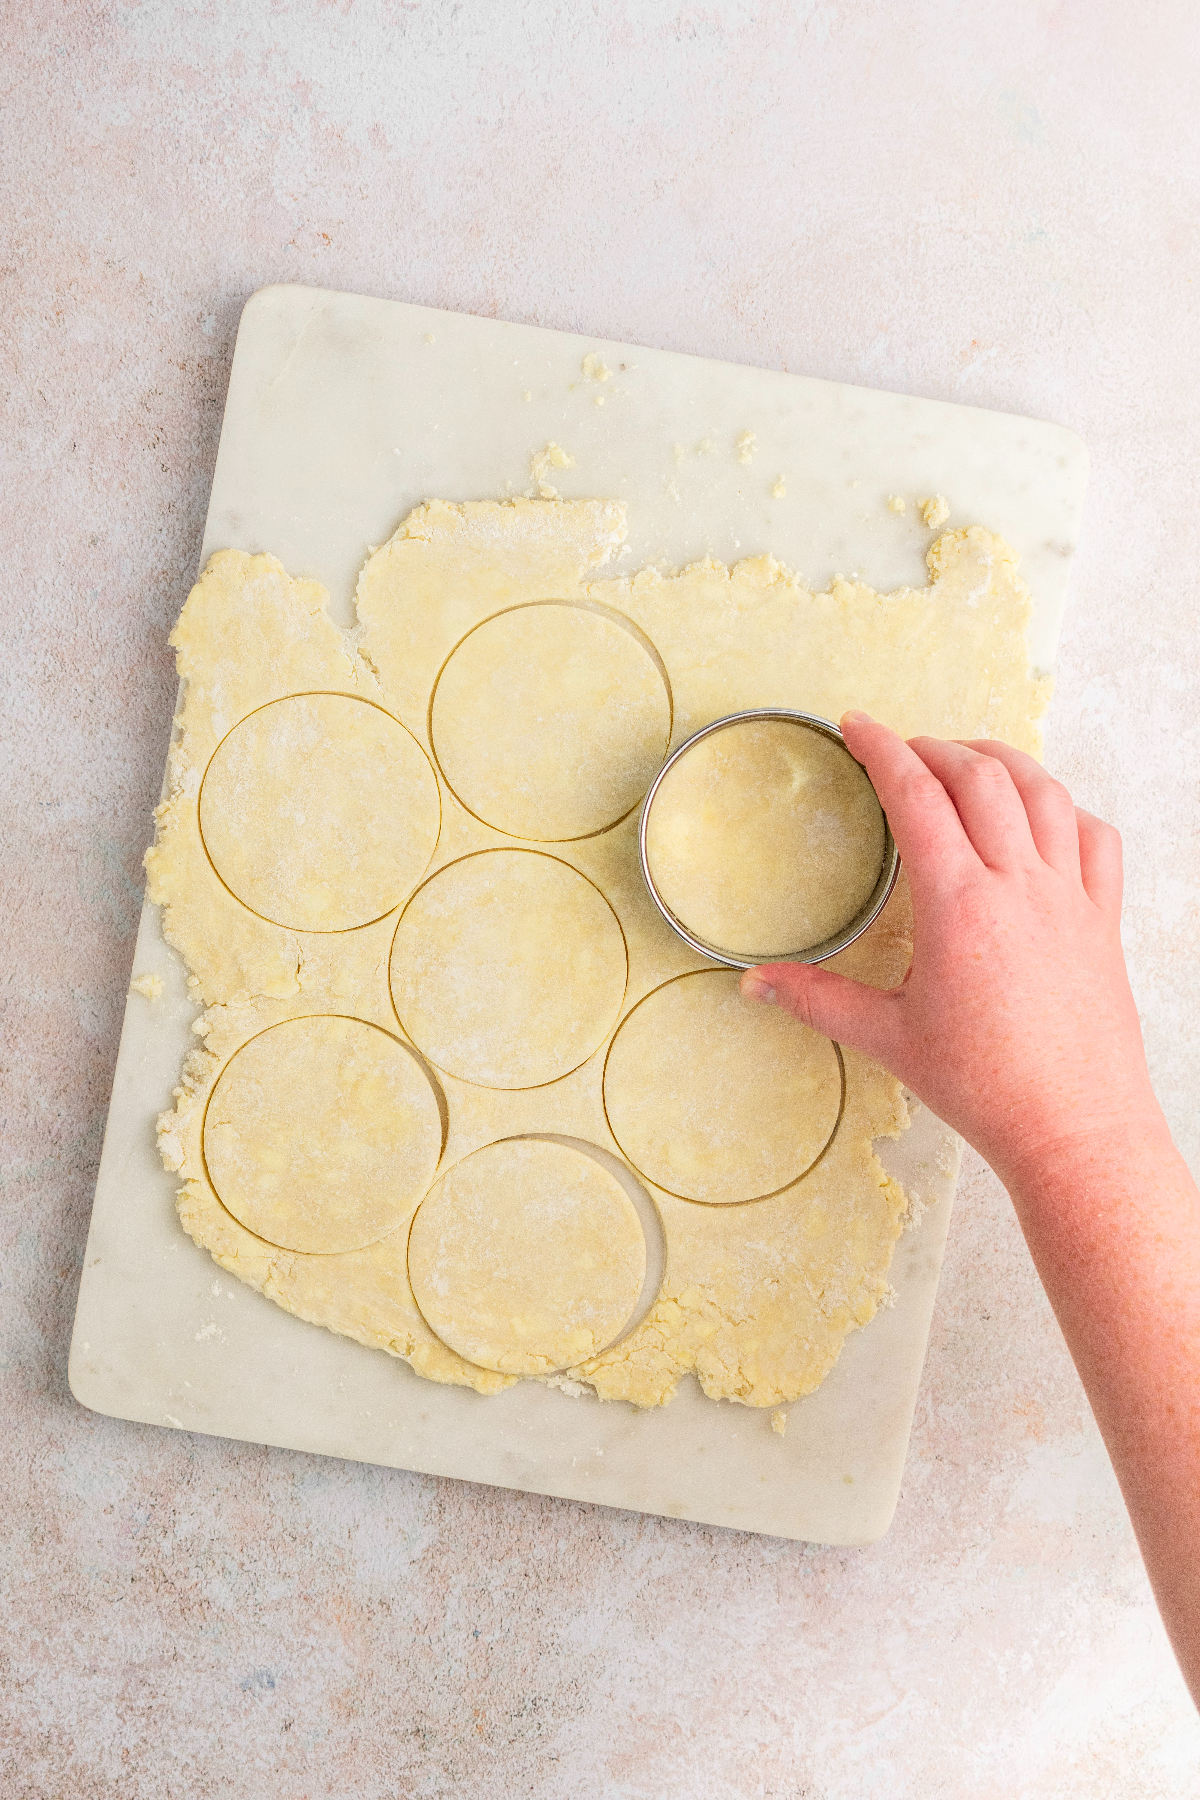 Cutting out pie dough into circles using a cookie cutter.